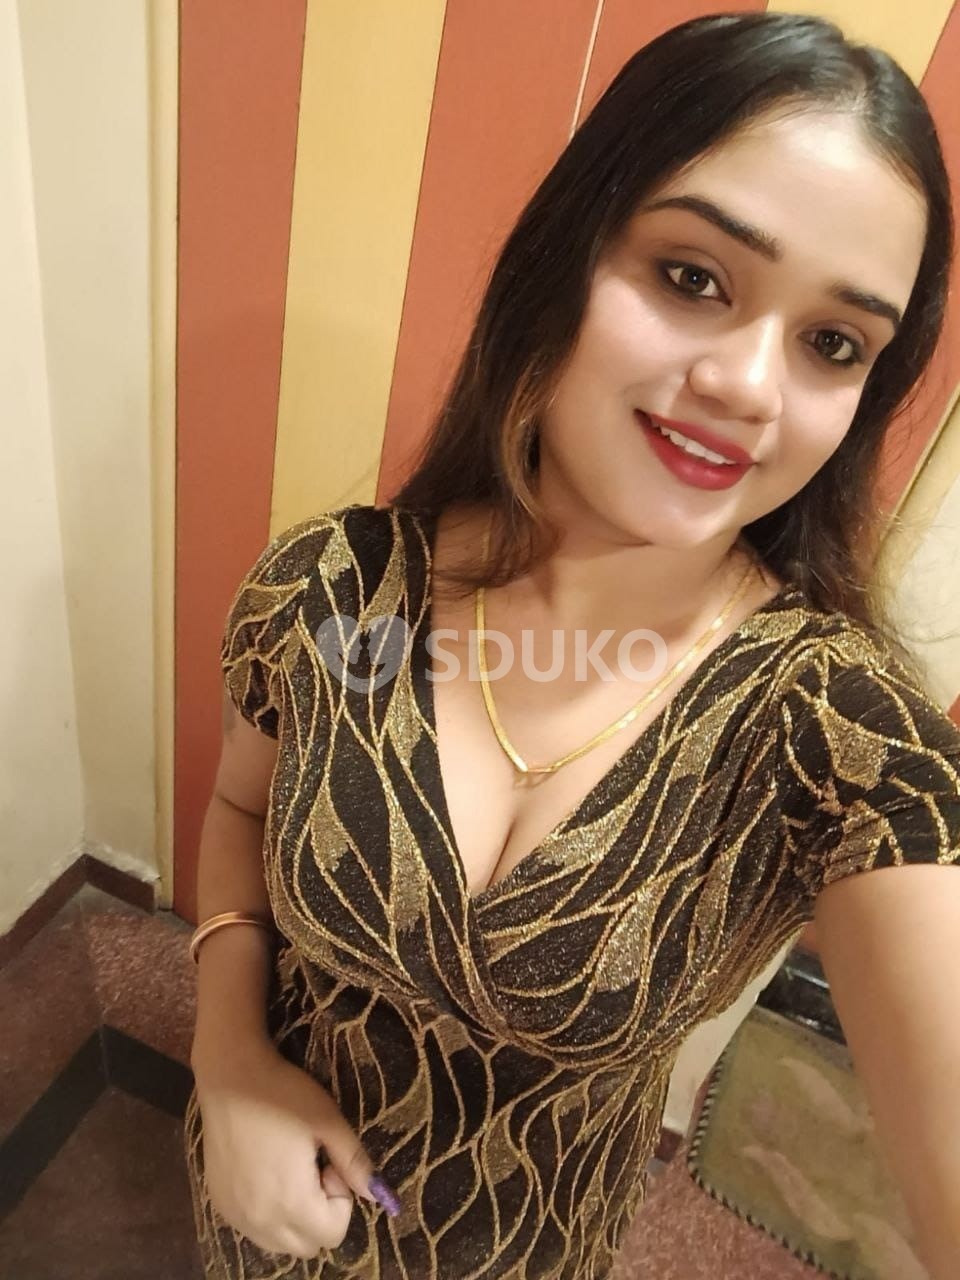 "MY SELF NISHA @#UNLIMITED SEX CUTE BEST SERVICE AND SAFE AND ,, SECURED SECURE AND"GENUINE